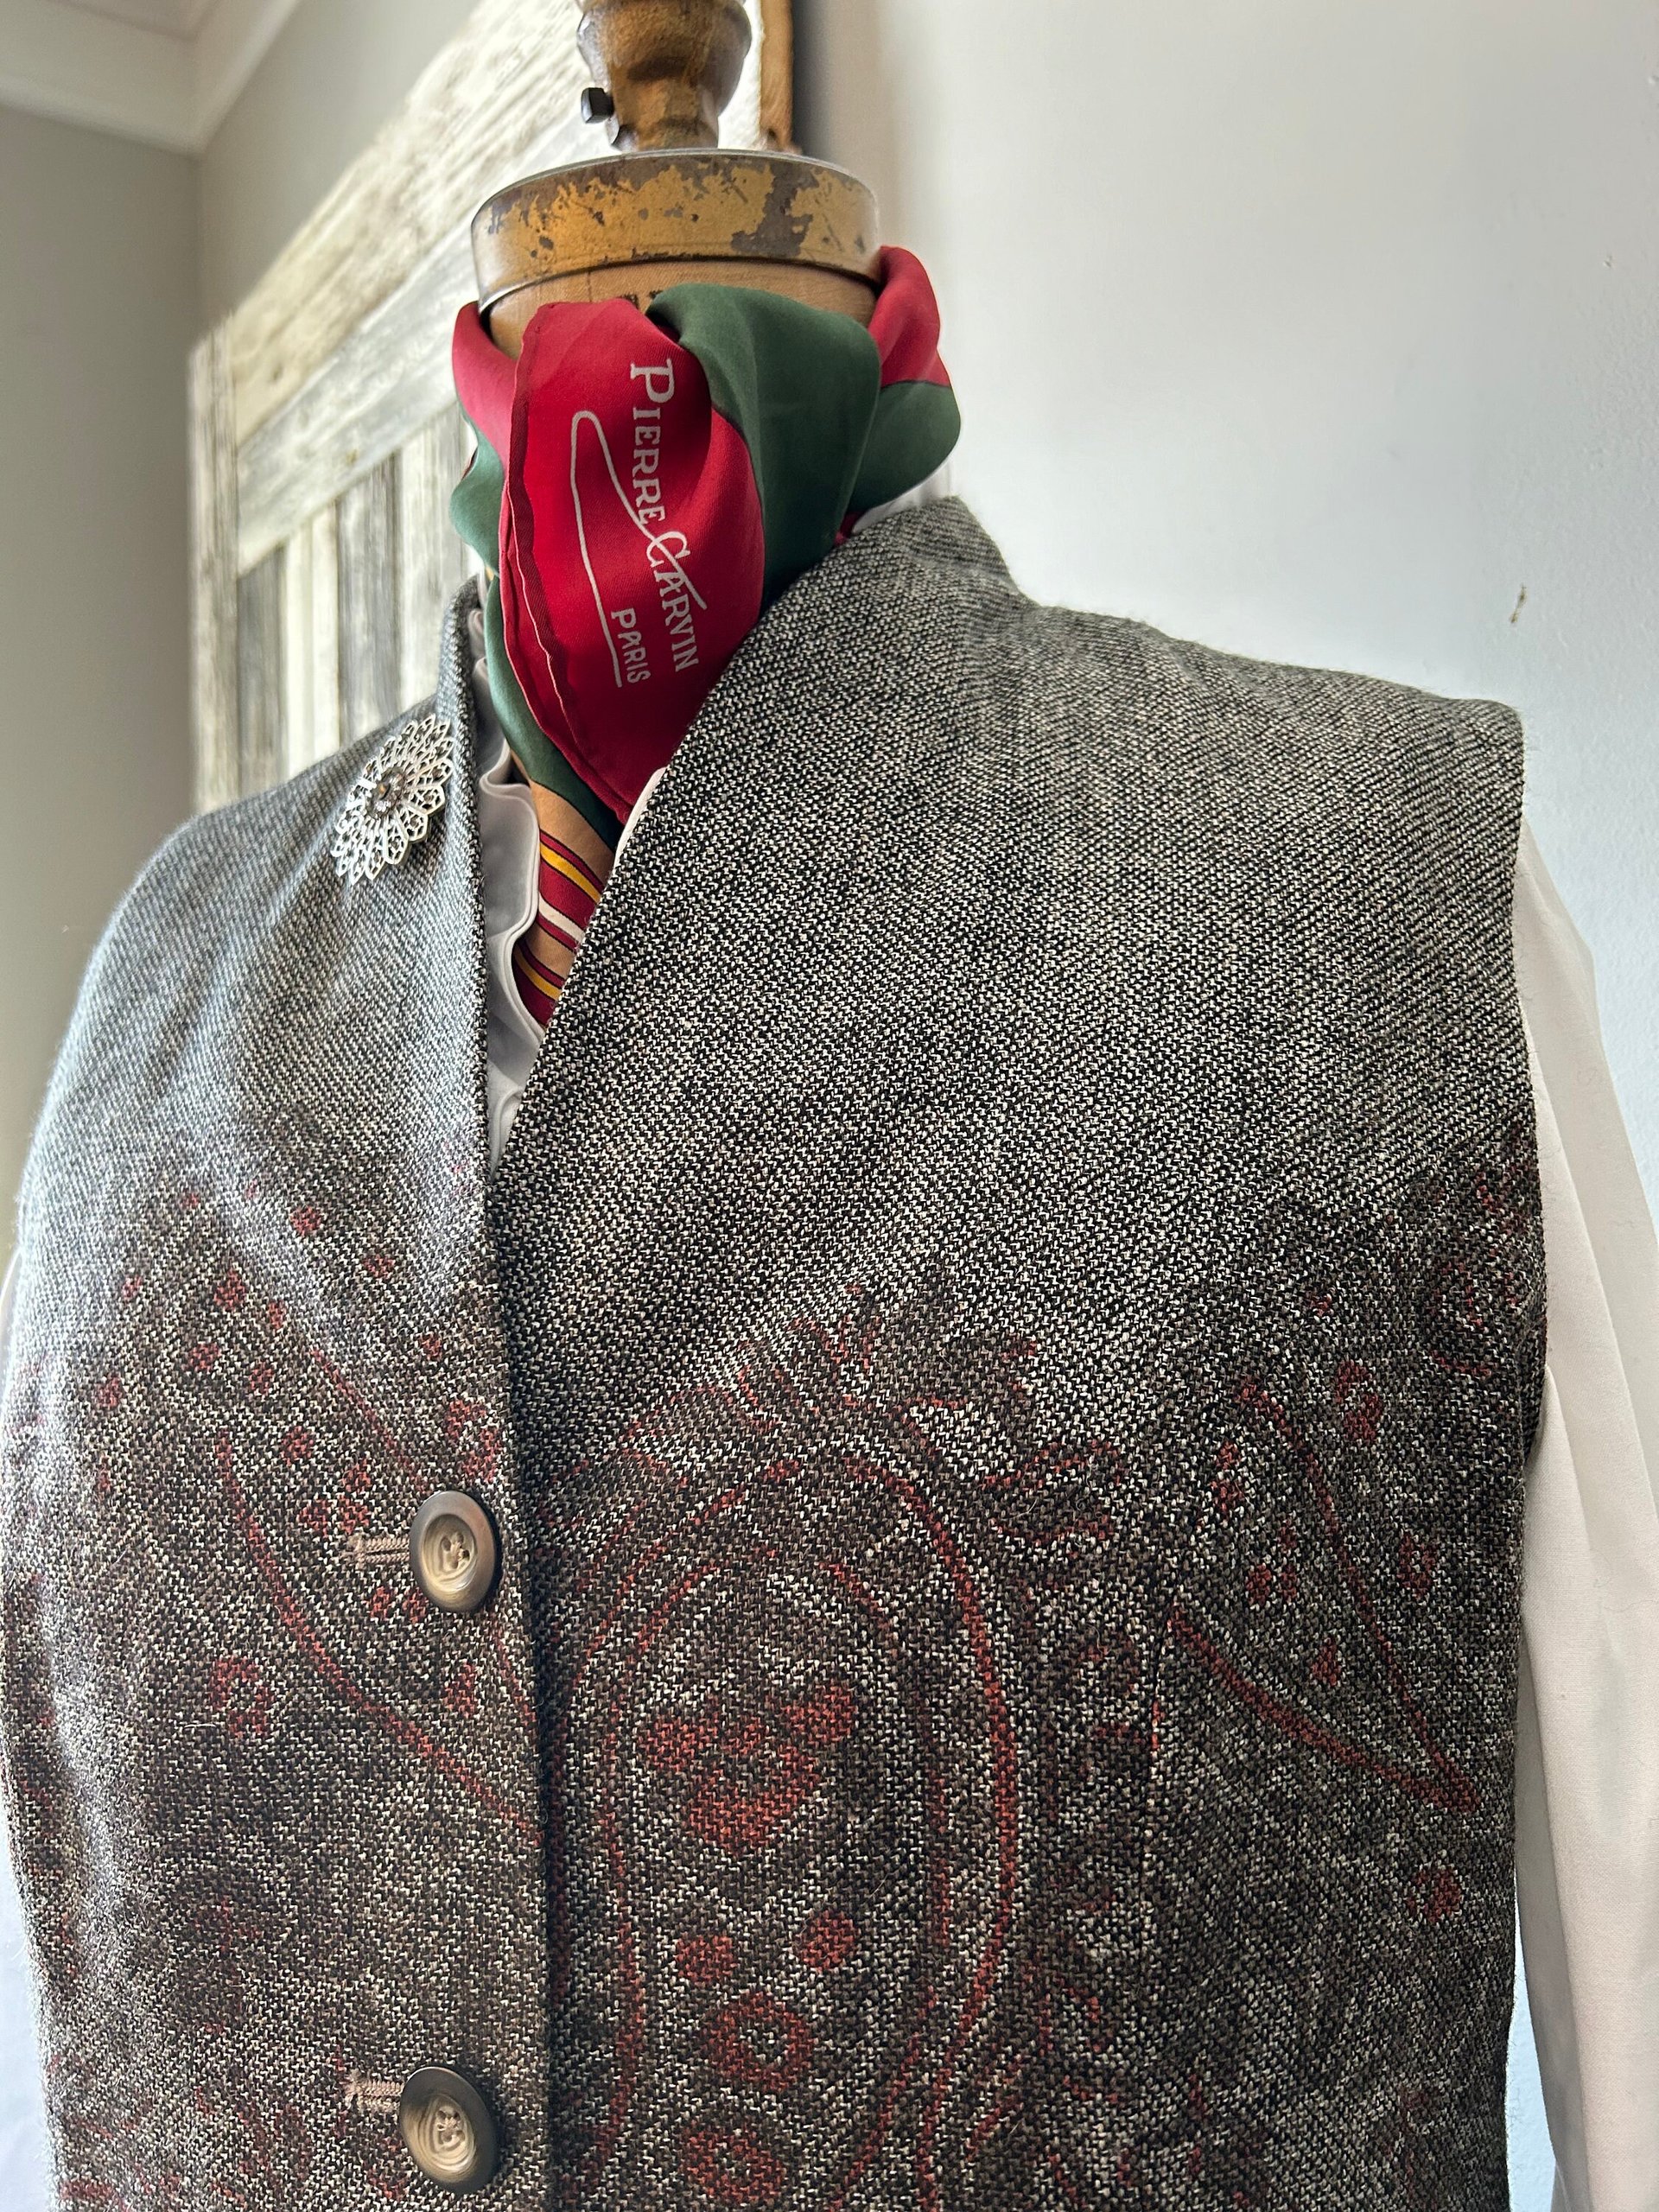 Paisley Tunic Vest with High Collar, Size XL, Upcycled